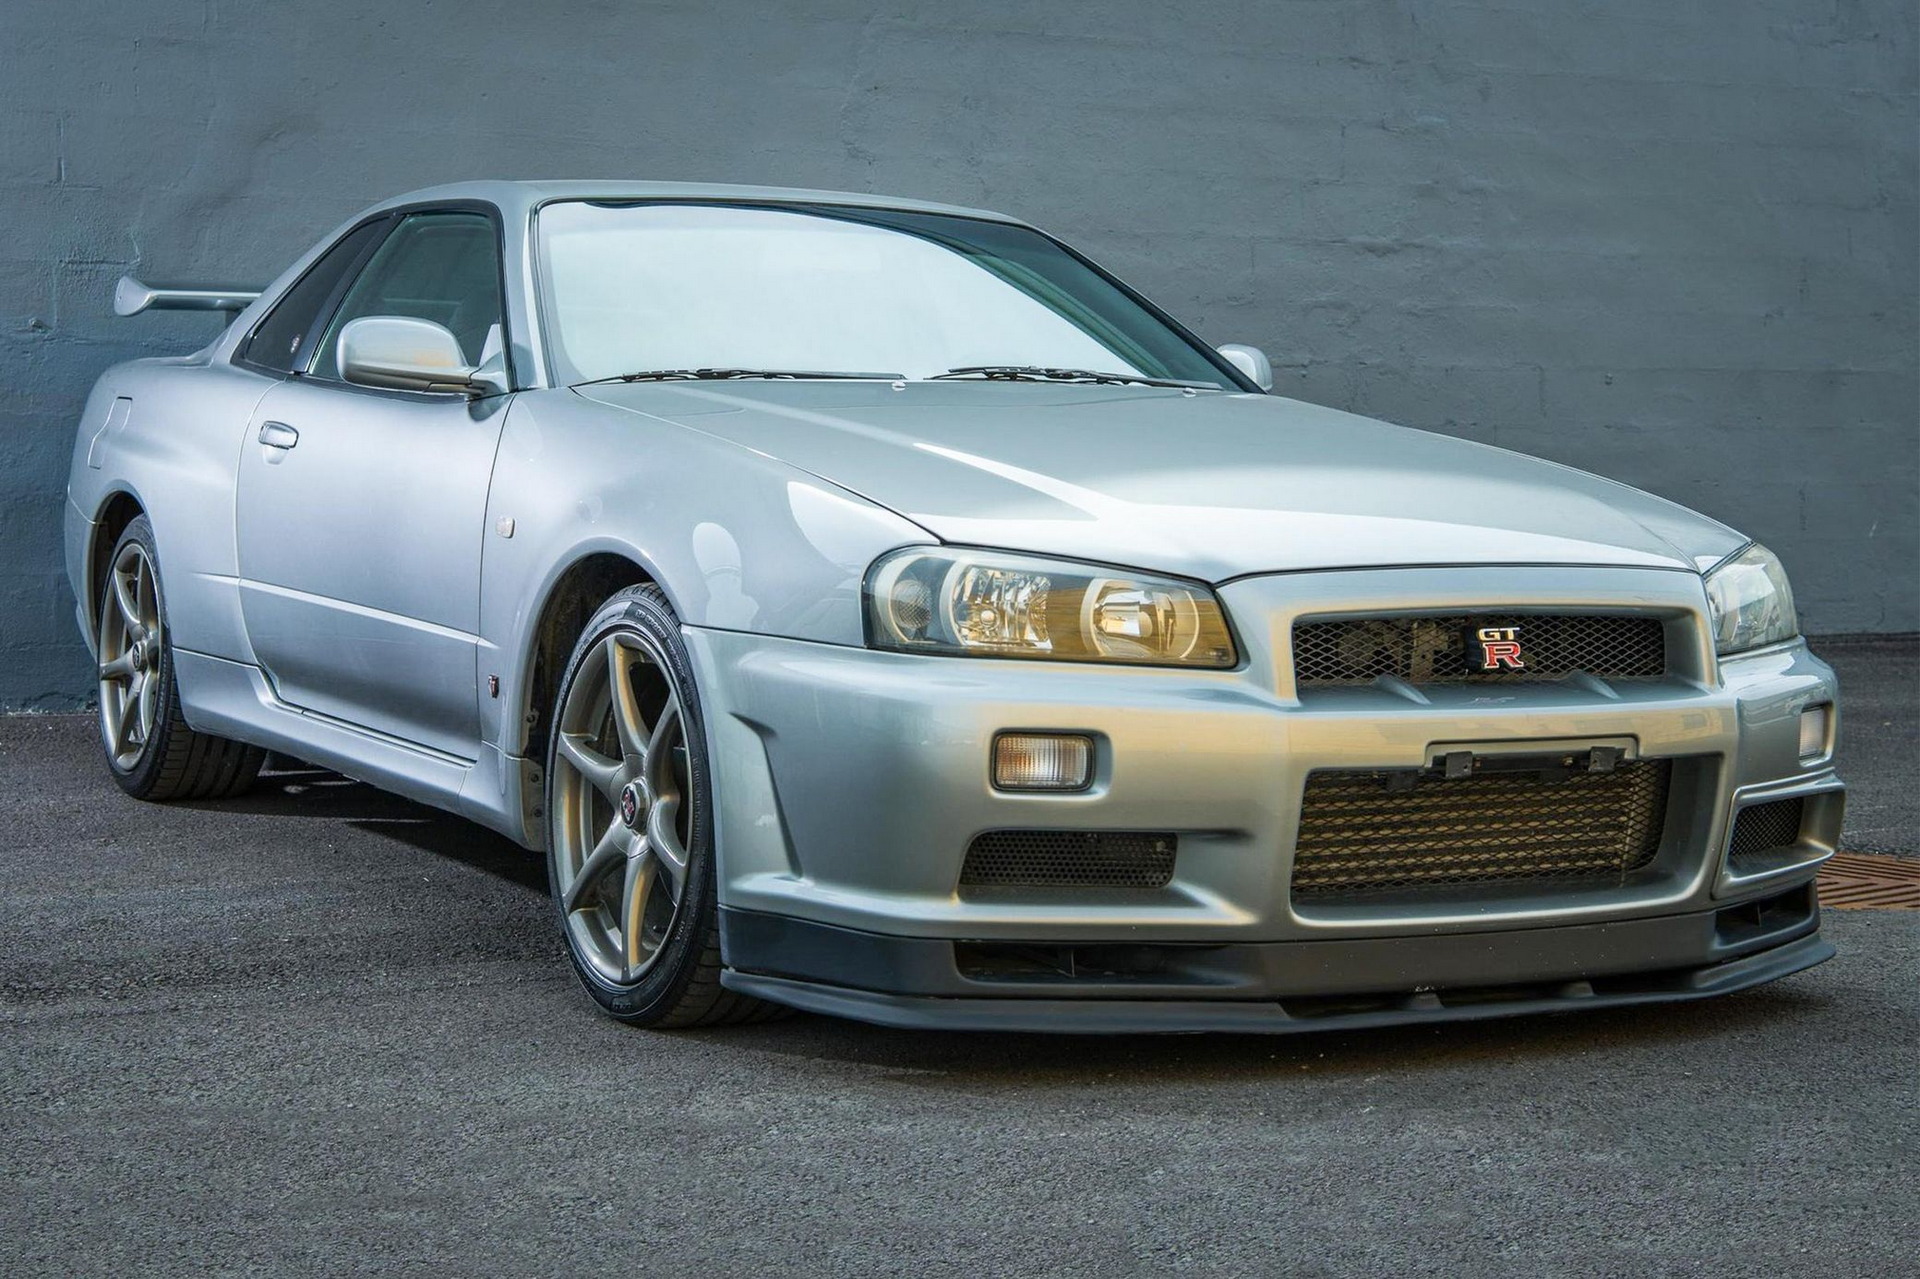 Take a deep breath: The R34 Nissan Skyline will be legal for import next  year - Autoblog